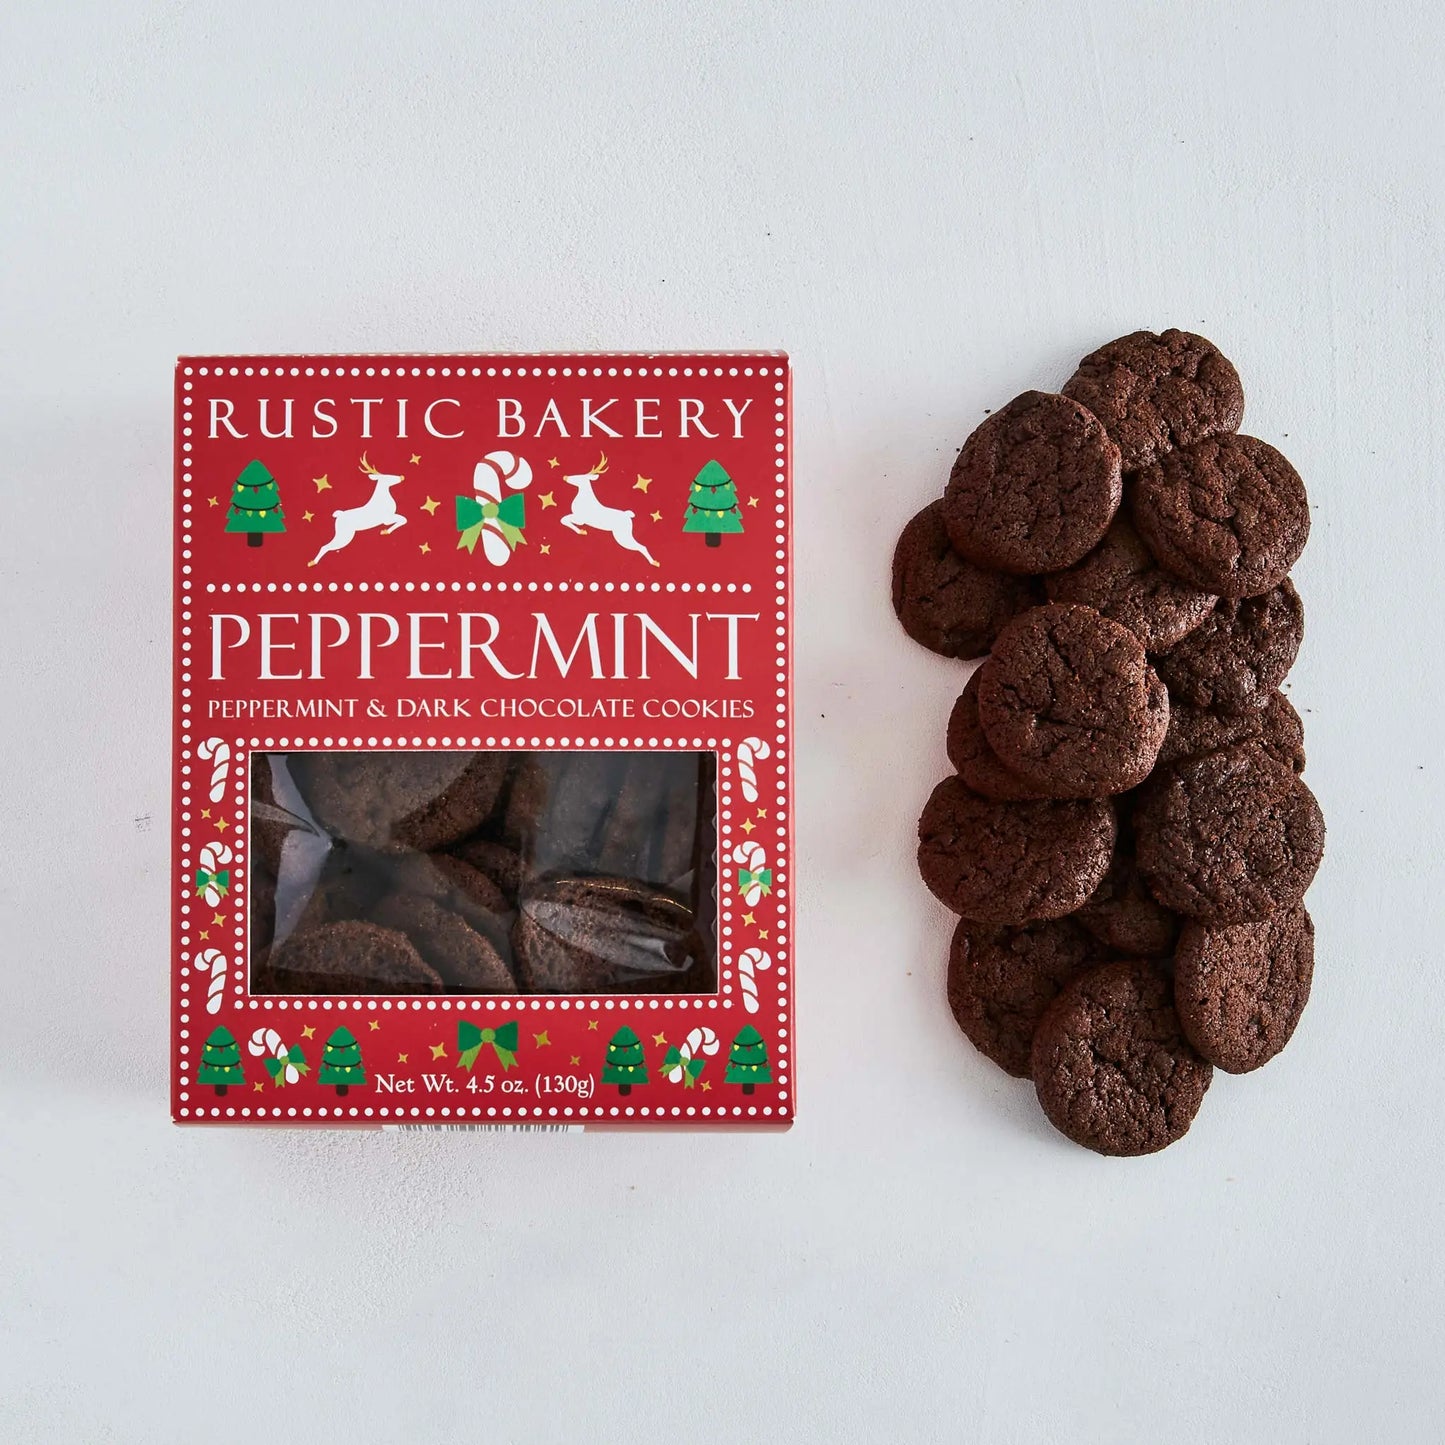 Peppermint and Dark Chocolate Cookies